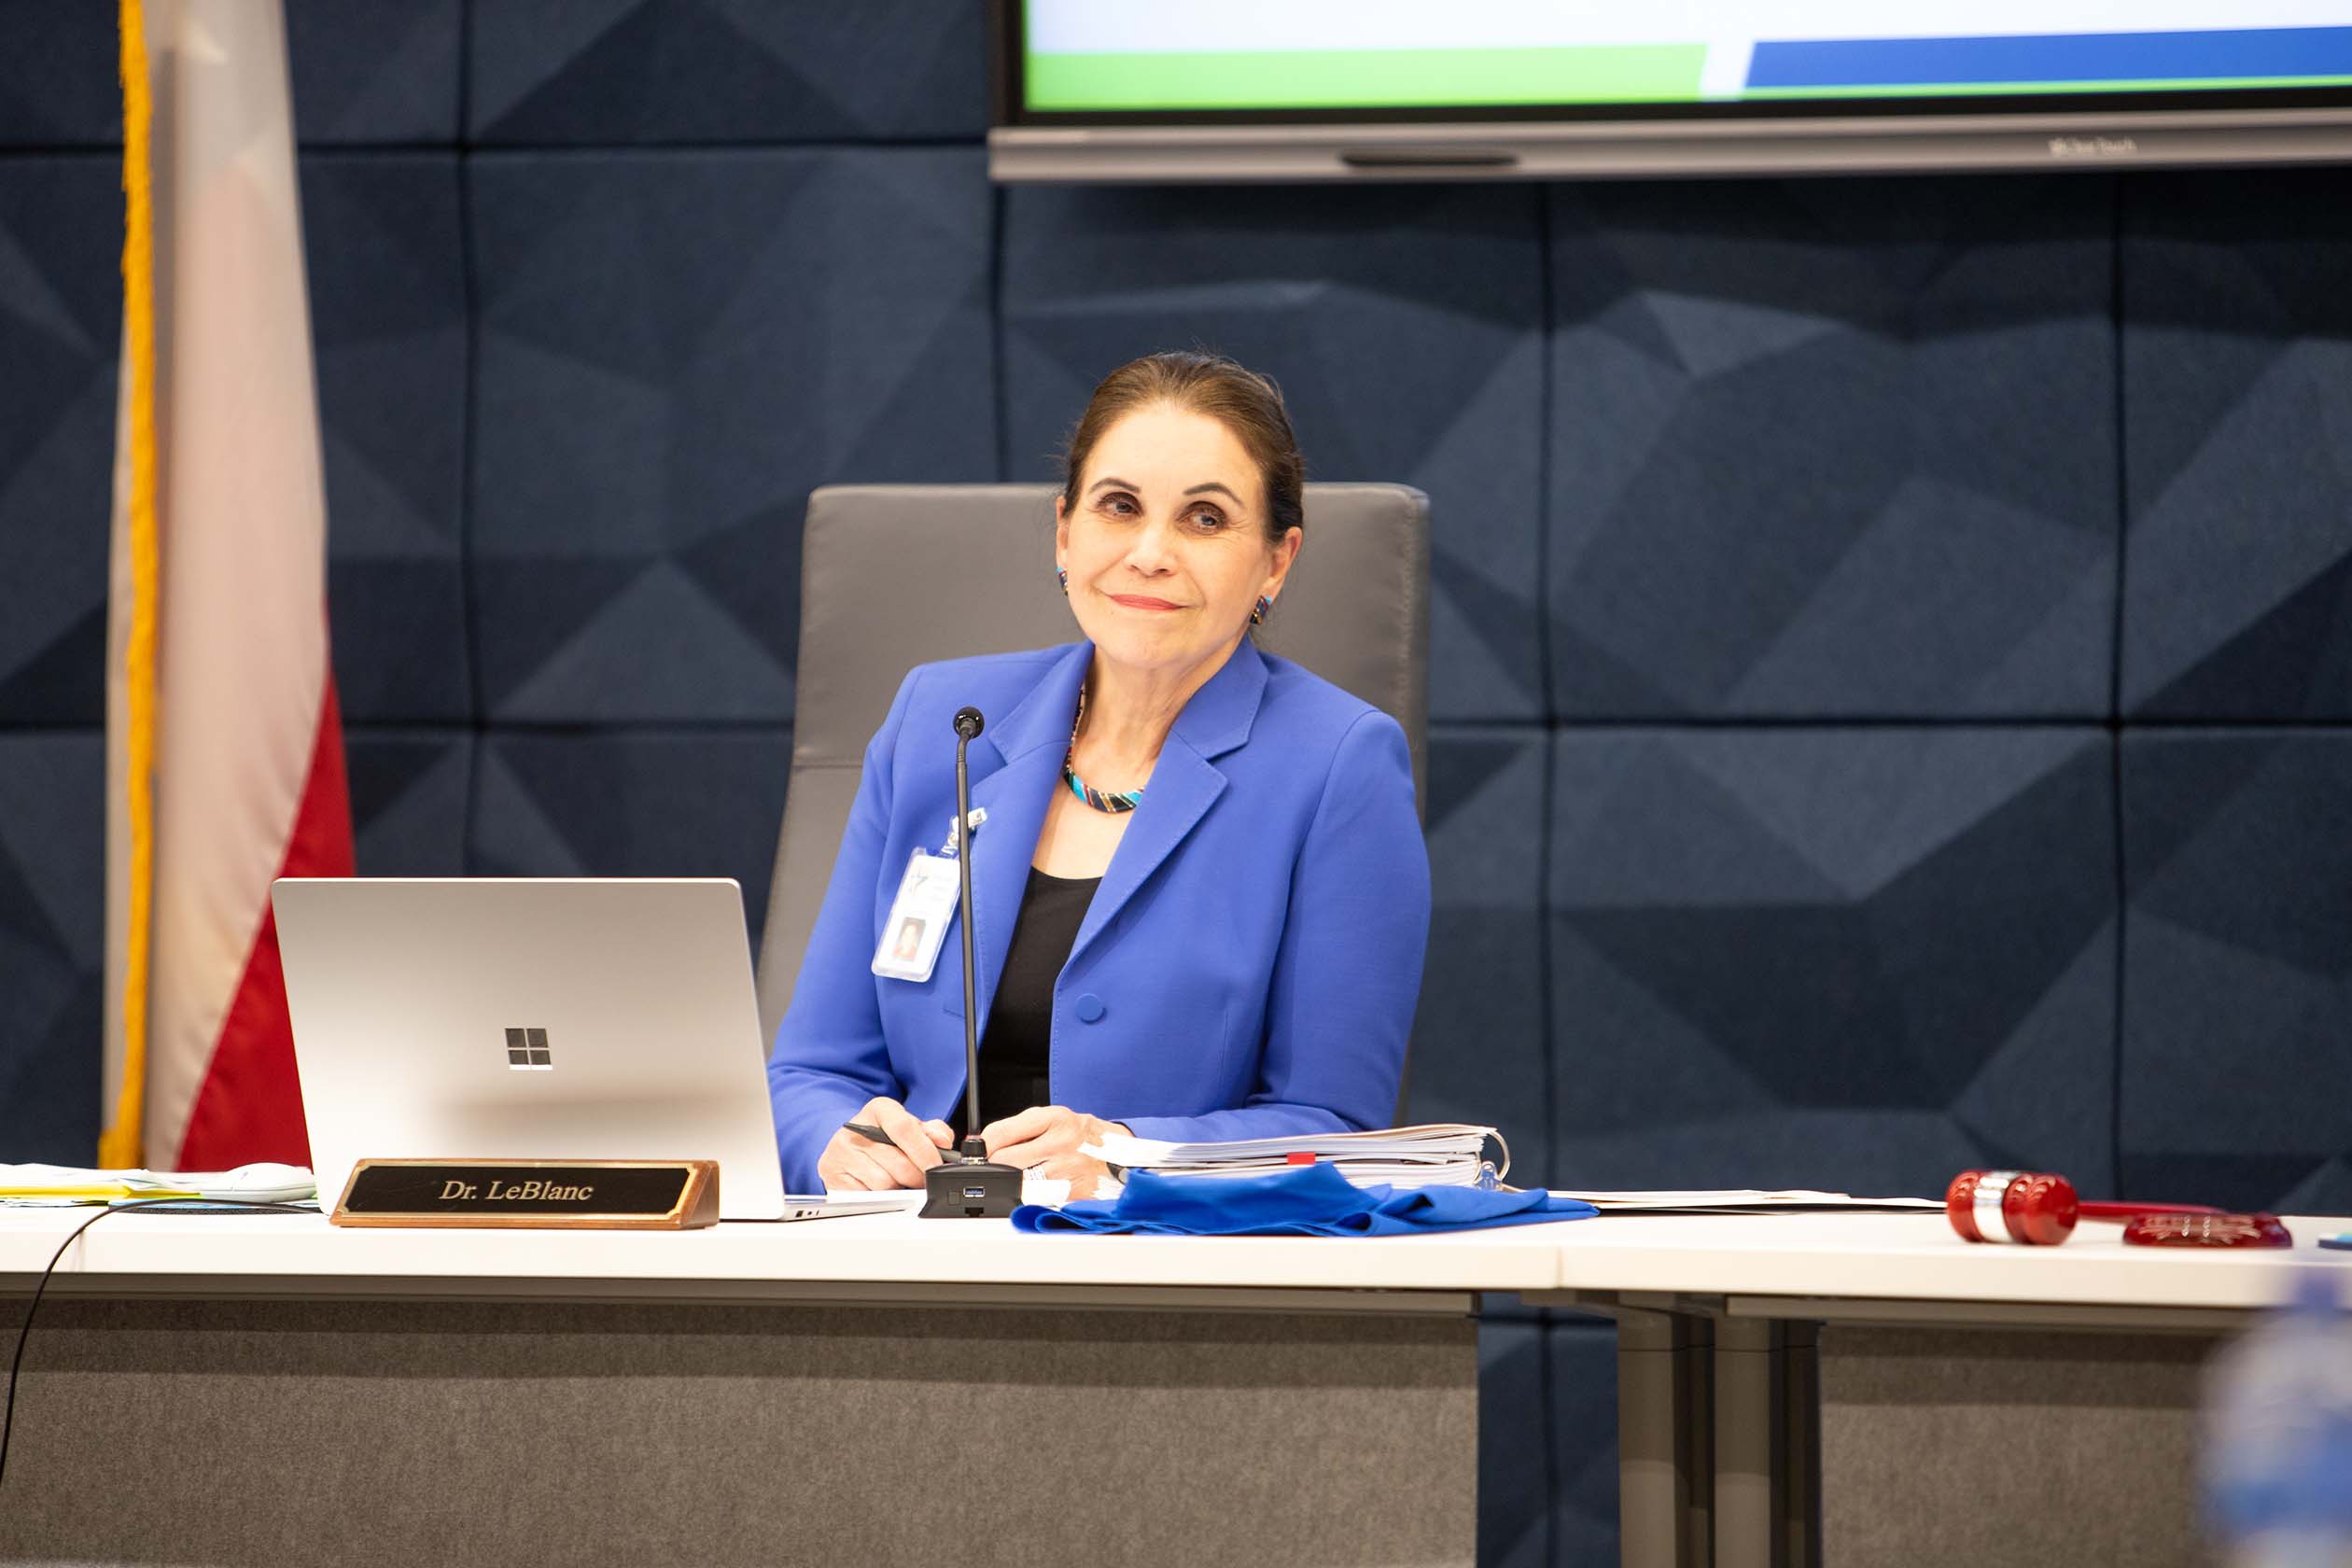 Elva LeBlanc, the new chancellor of TCC, smiles during the Jan. board meeting. She became the sixth chancellor on Dec. 8 last year. Joel Solis/The Collegian